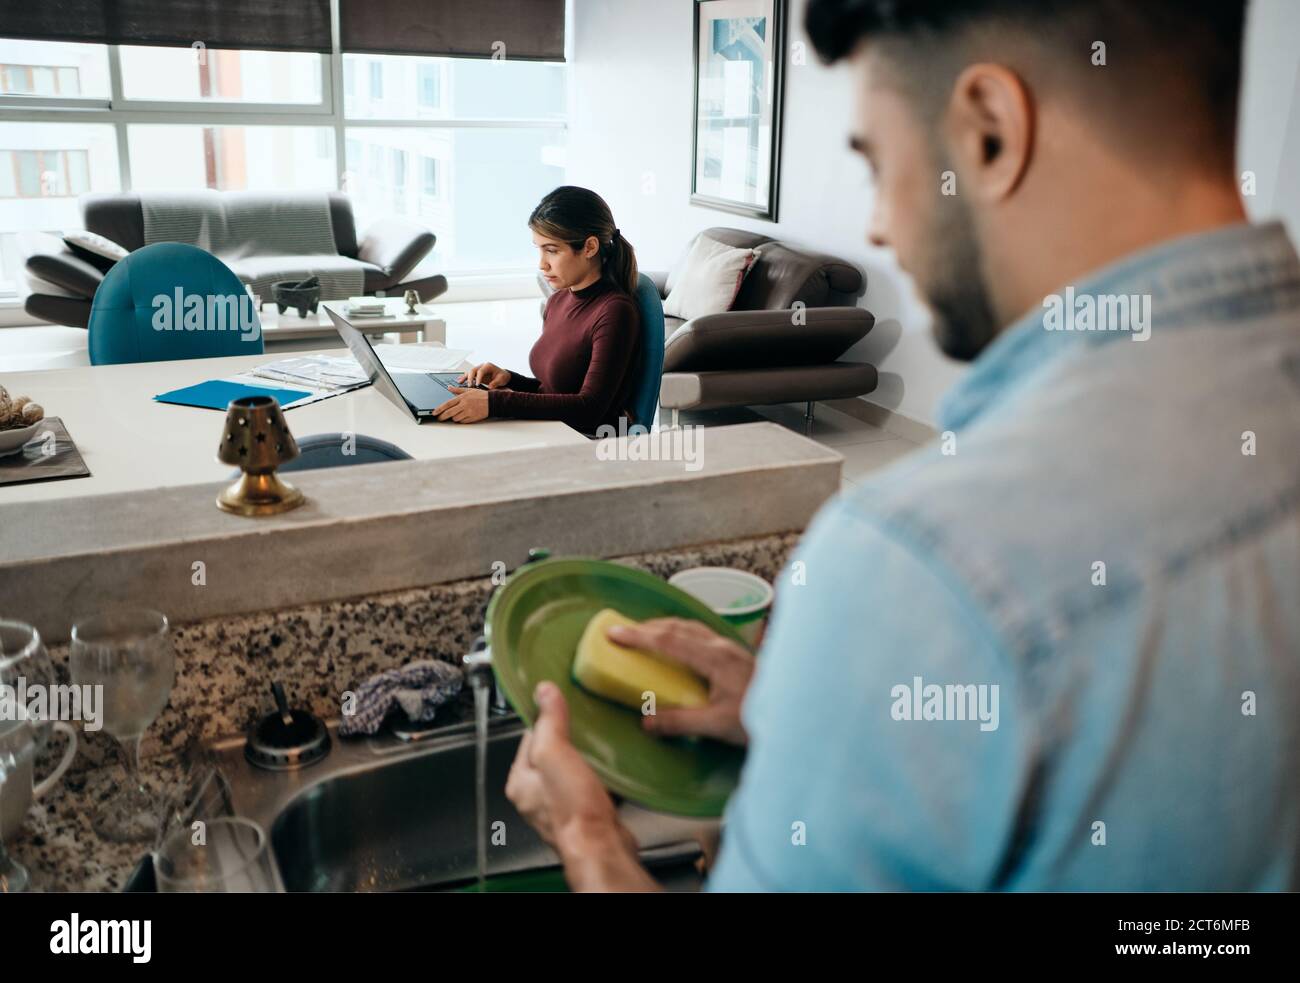 Business Woman Working At Home And Man Doing Chores Stock Photo